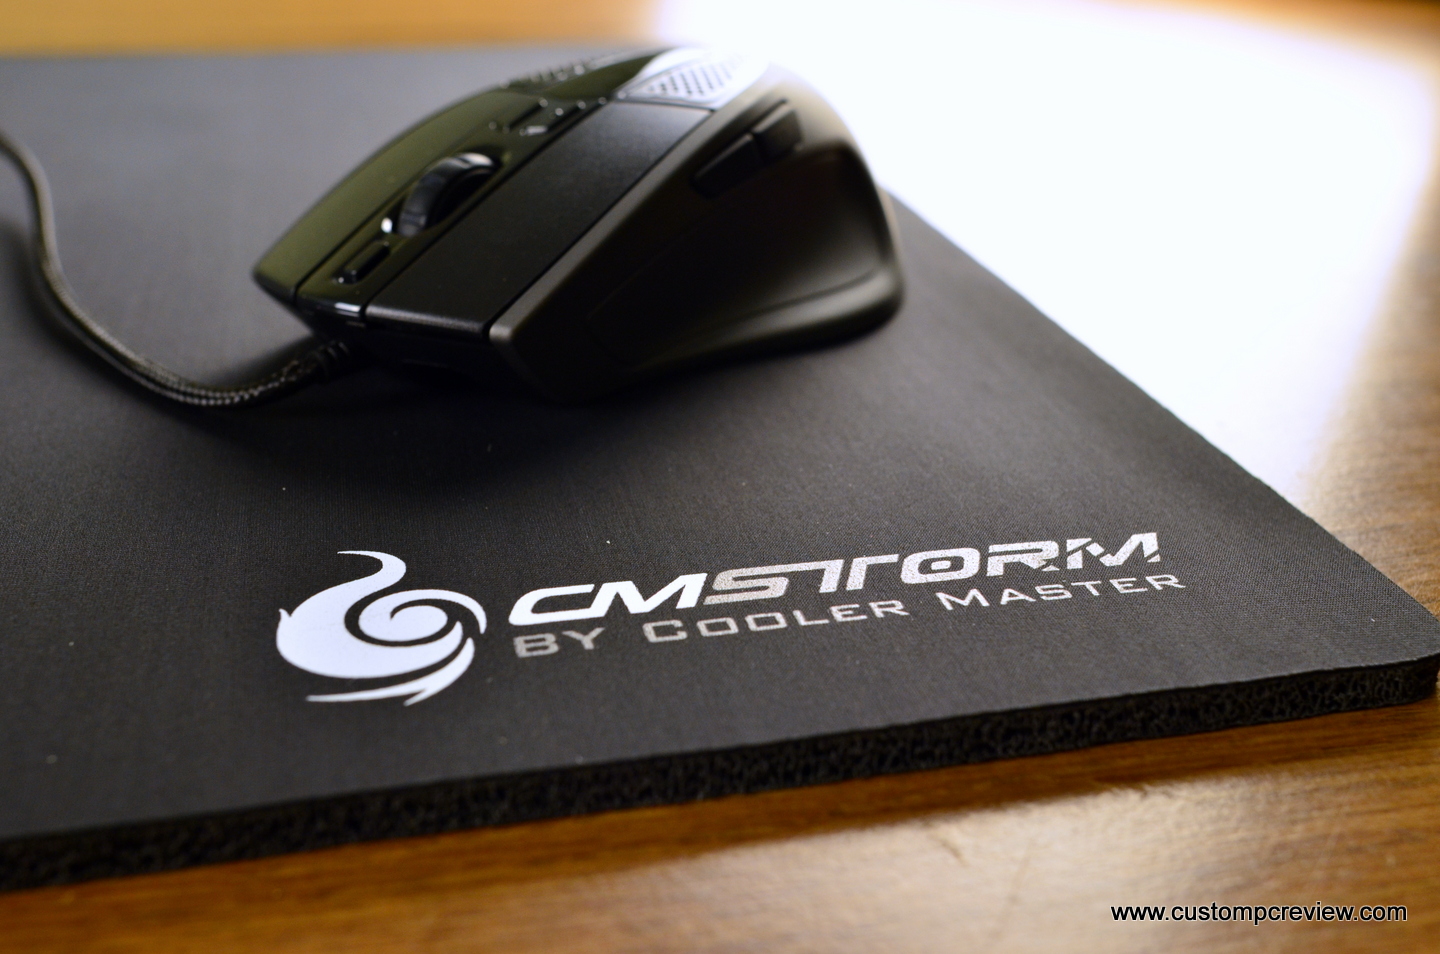 Cooler Master CM Storm Sentinel Advance II Gaming Mouse and Speed RX Mousepad Review